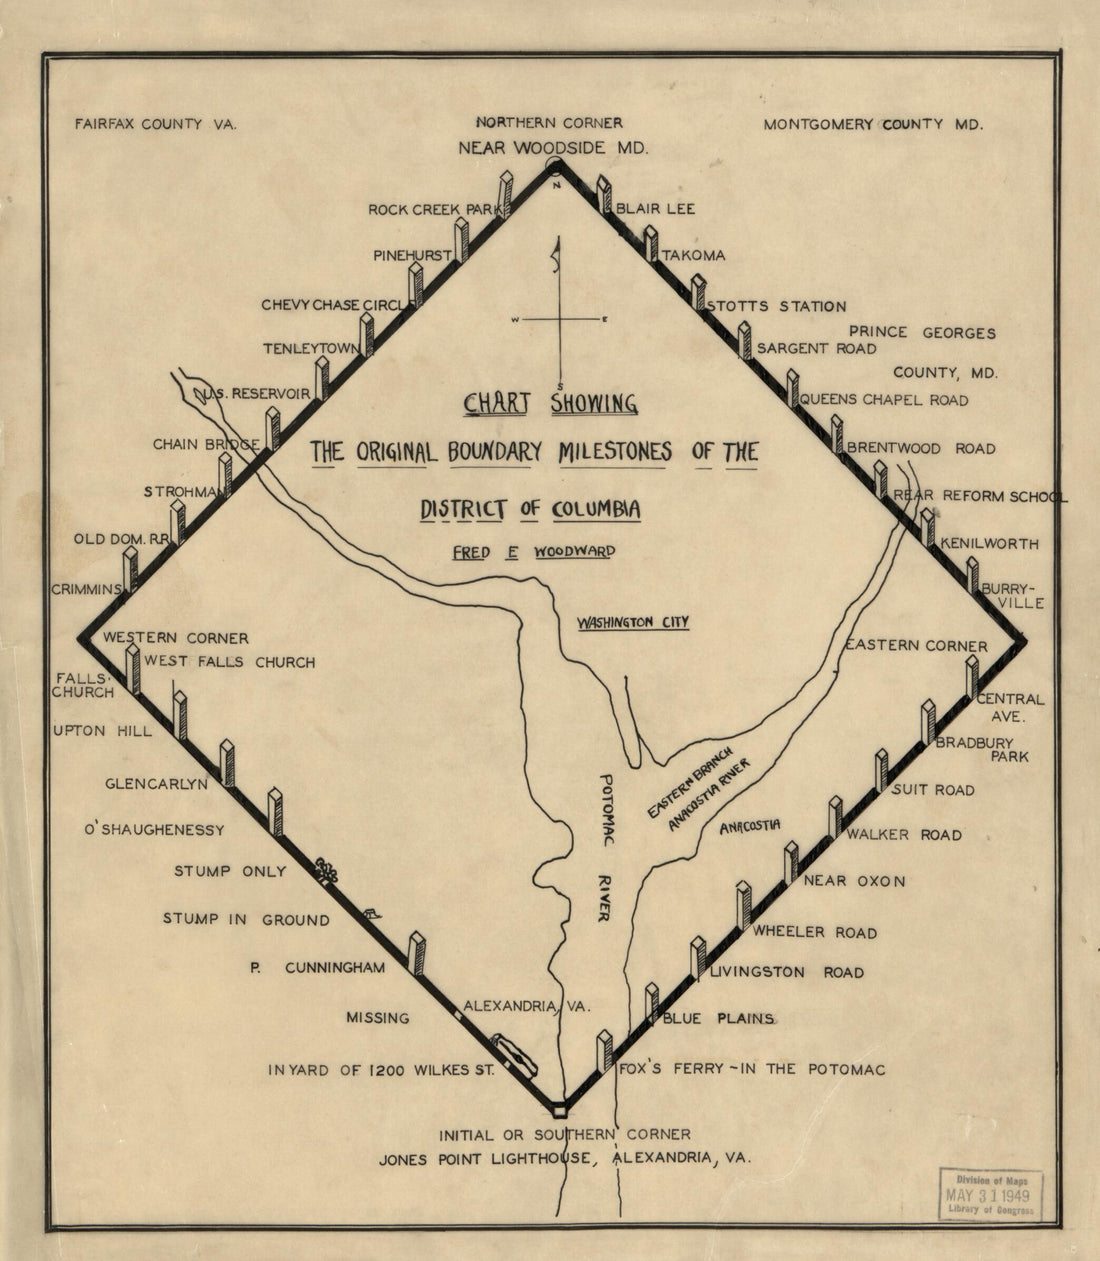 This old map of Chart Showing the Original Boundary Milestones of the District of Columbia from 1906 was created by Fred E. (Fred Eugene) Woodward in 1906